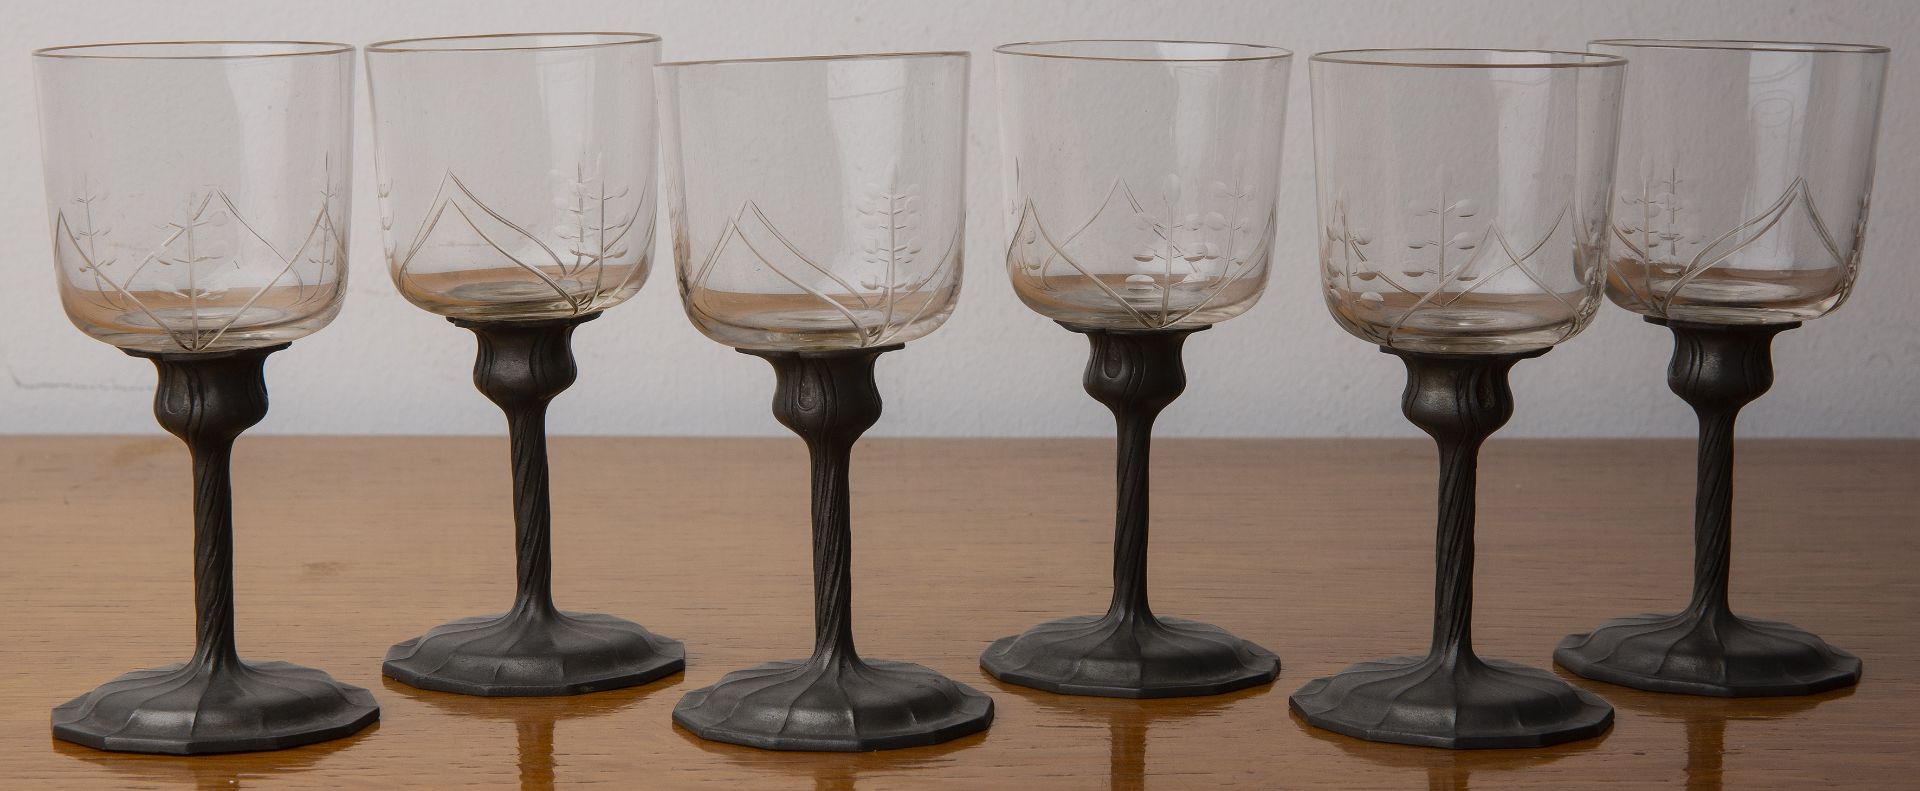 Orivit set of six Art Nouveau drinking glasses on pewter stems, the bowls with cut decoration, - Image 3 of 3